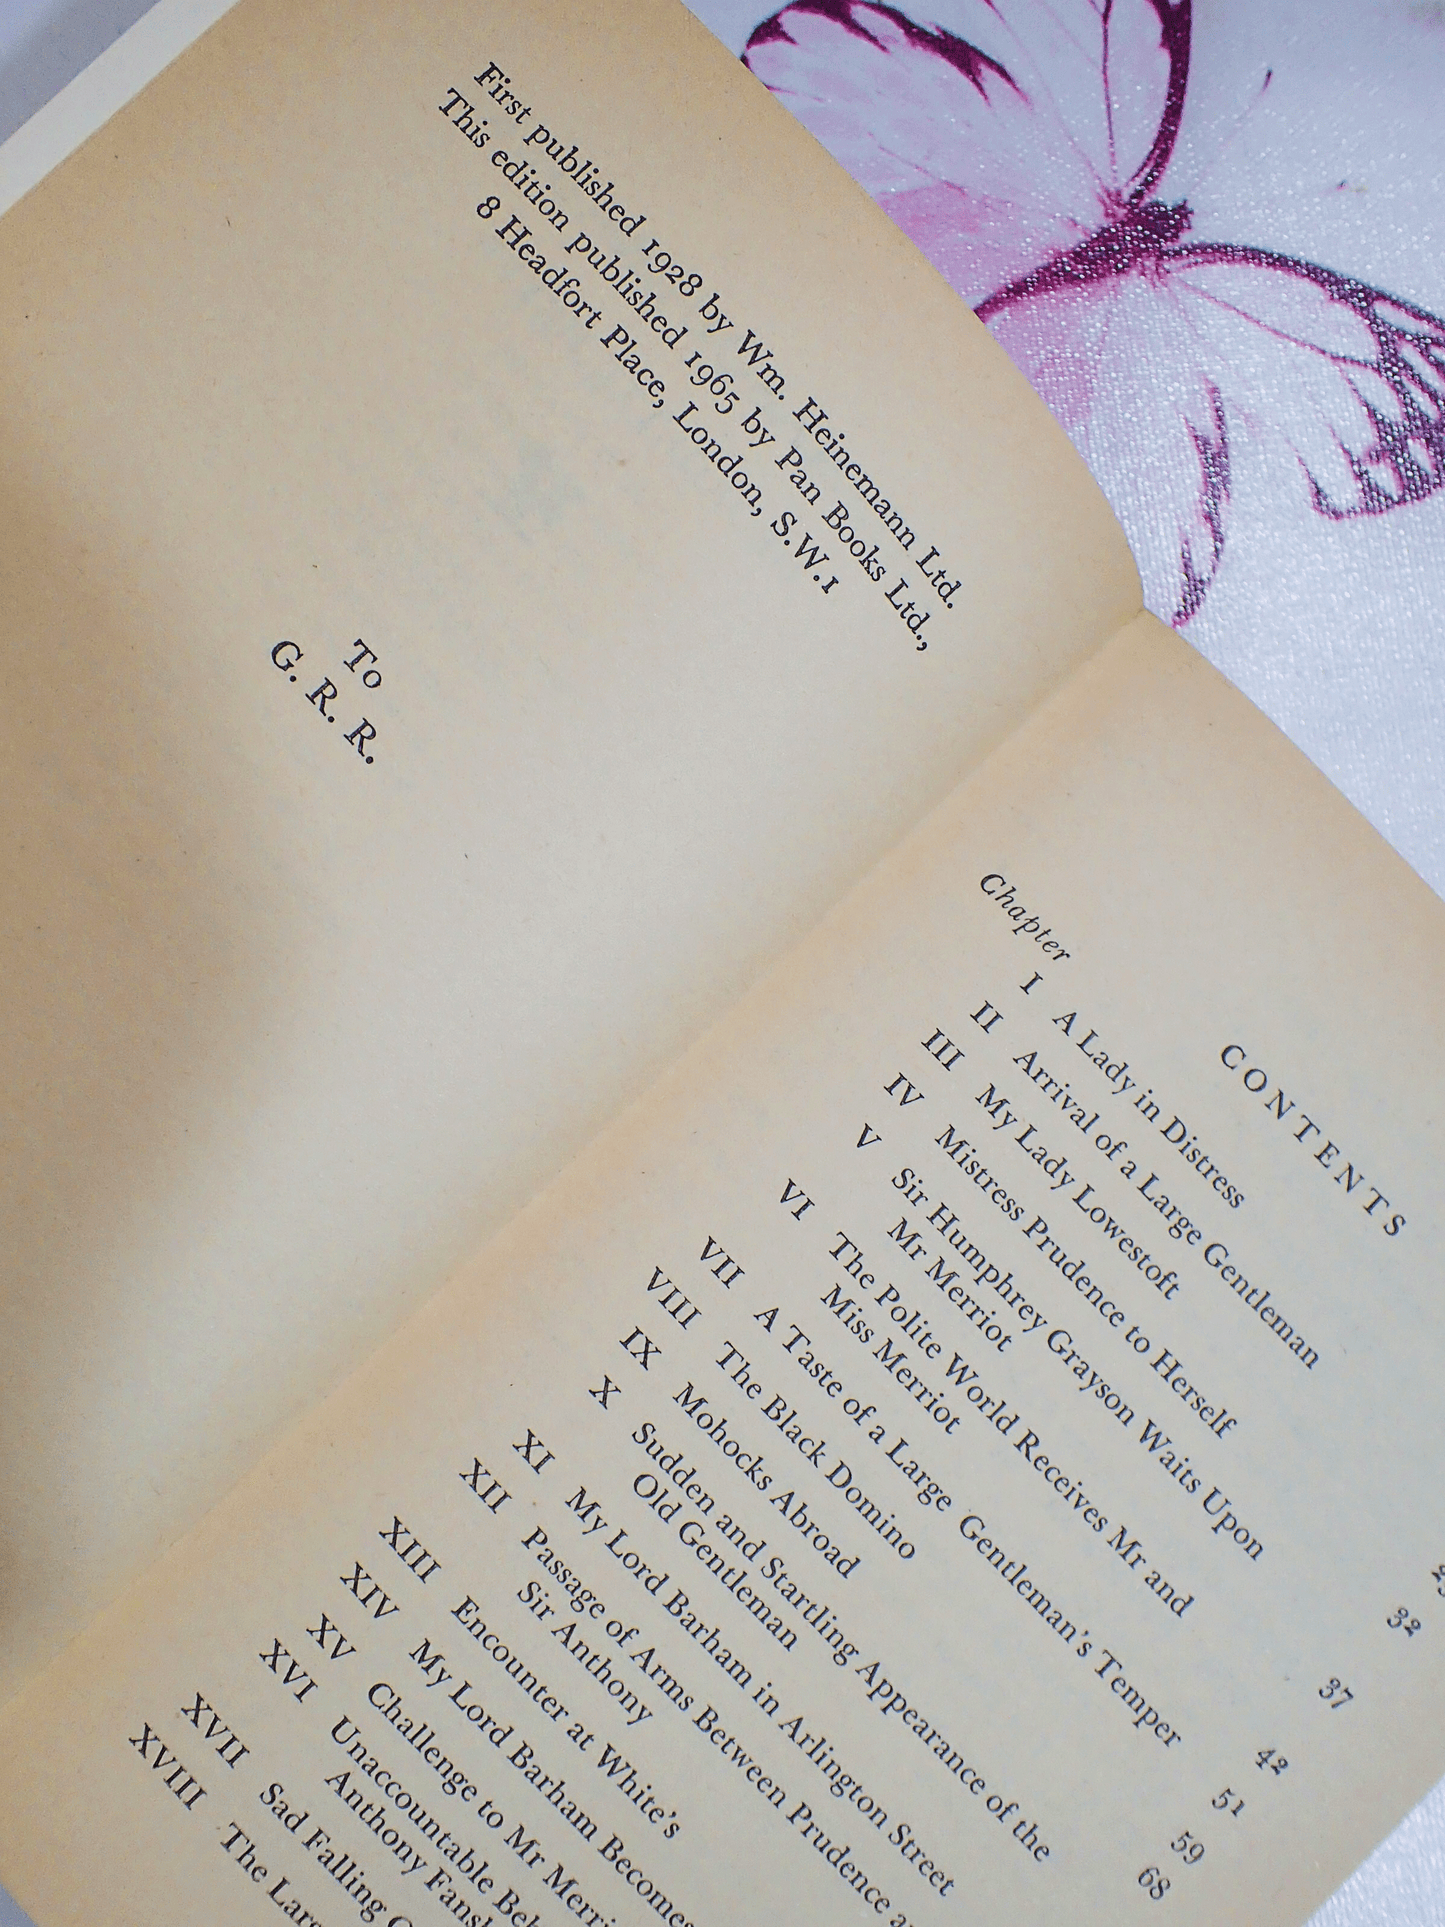 Pages showing publication information for vintage Pan Paperback ' The Masqueraders' by Georgette Heyer 'This edition published 1965 by Pan Books Ltd.'